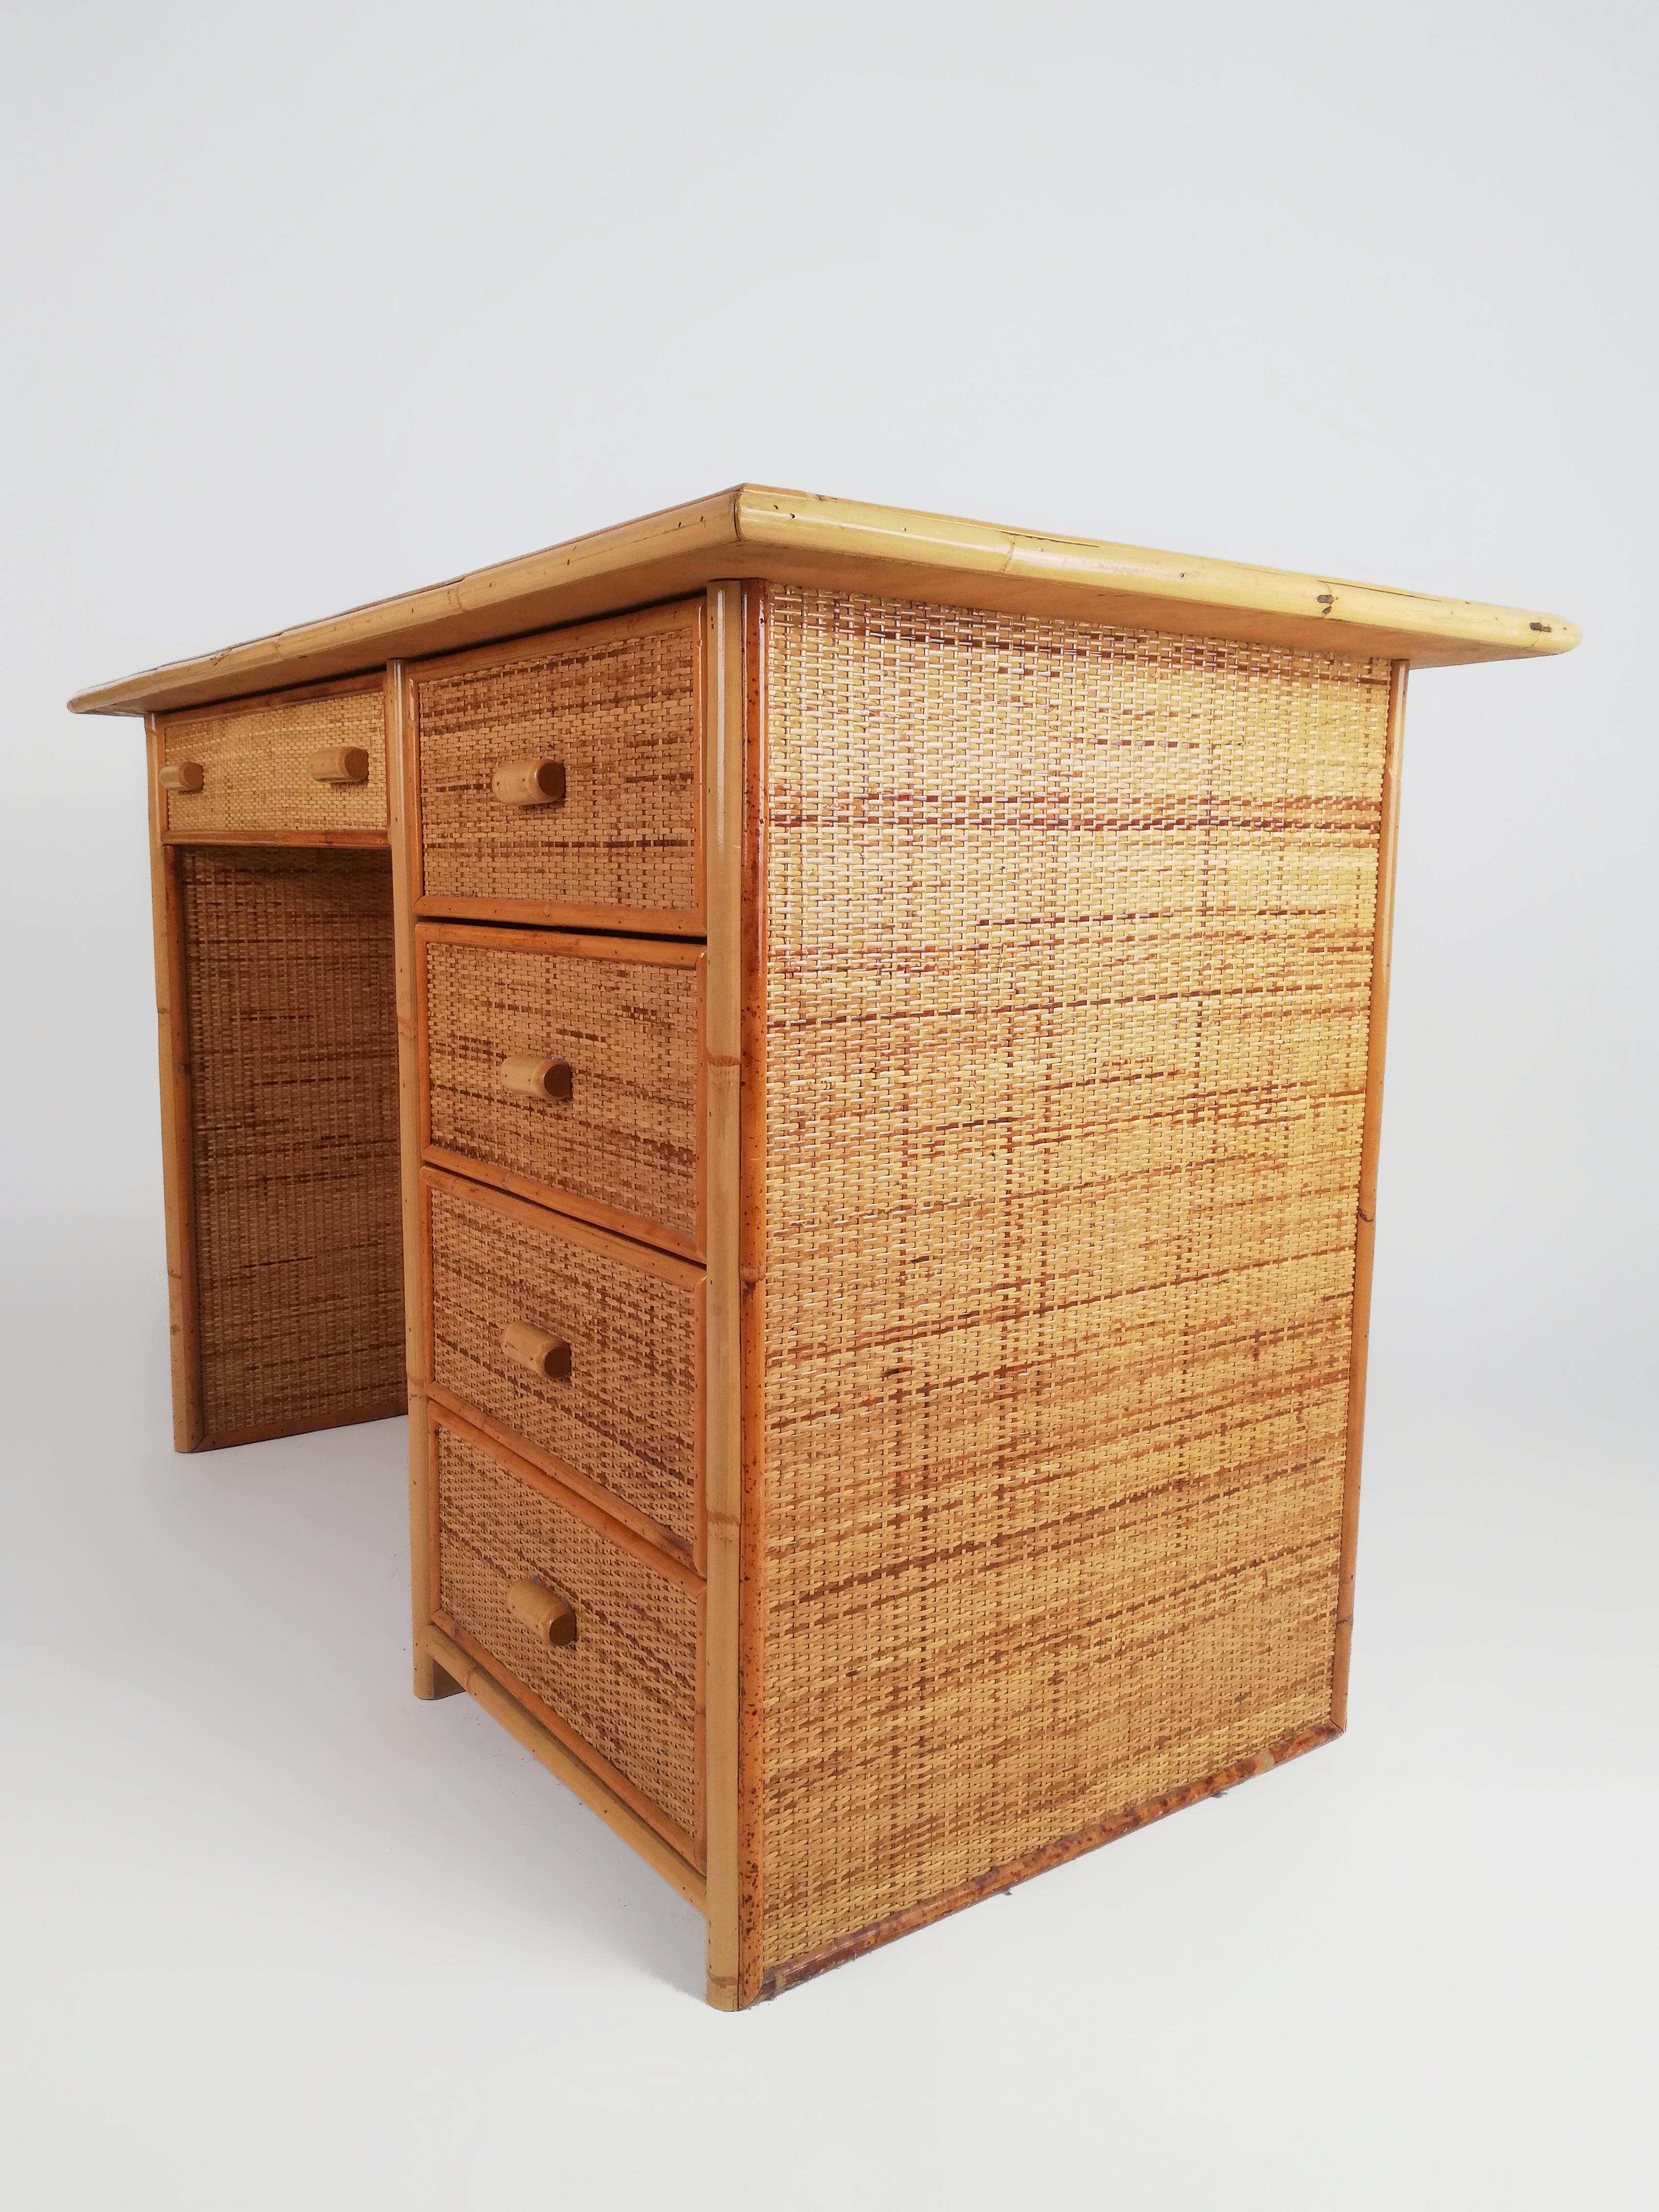 Vintage Italian Writing Desk with Drawers in Bamboo, Rattan and Plywood, 1970s For Sale 1